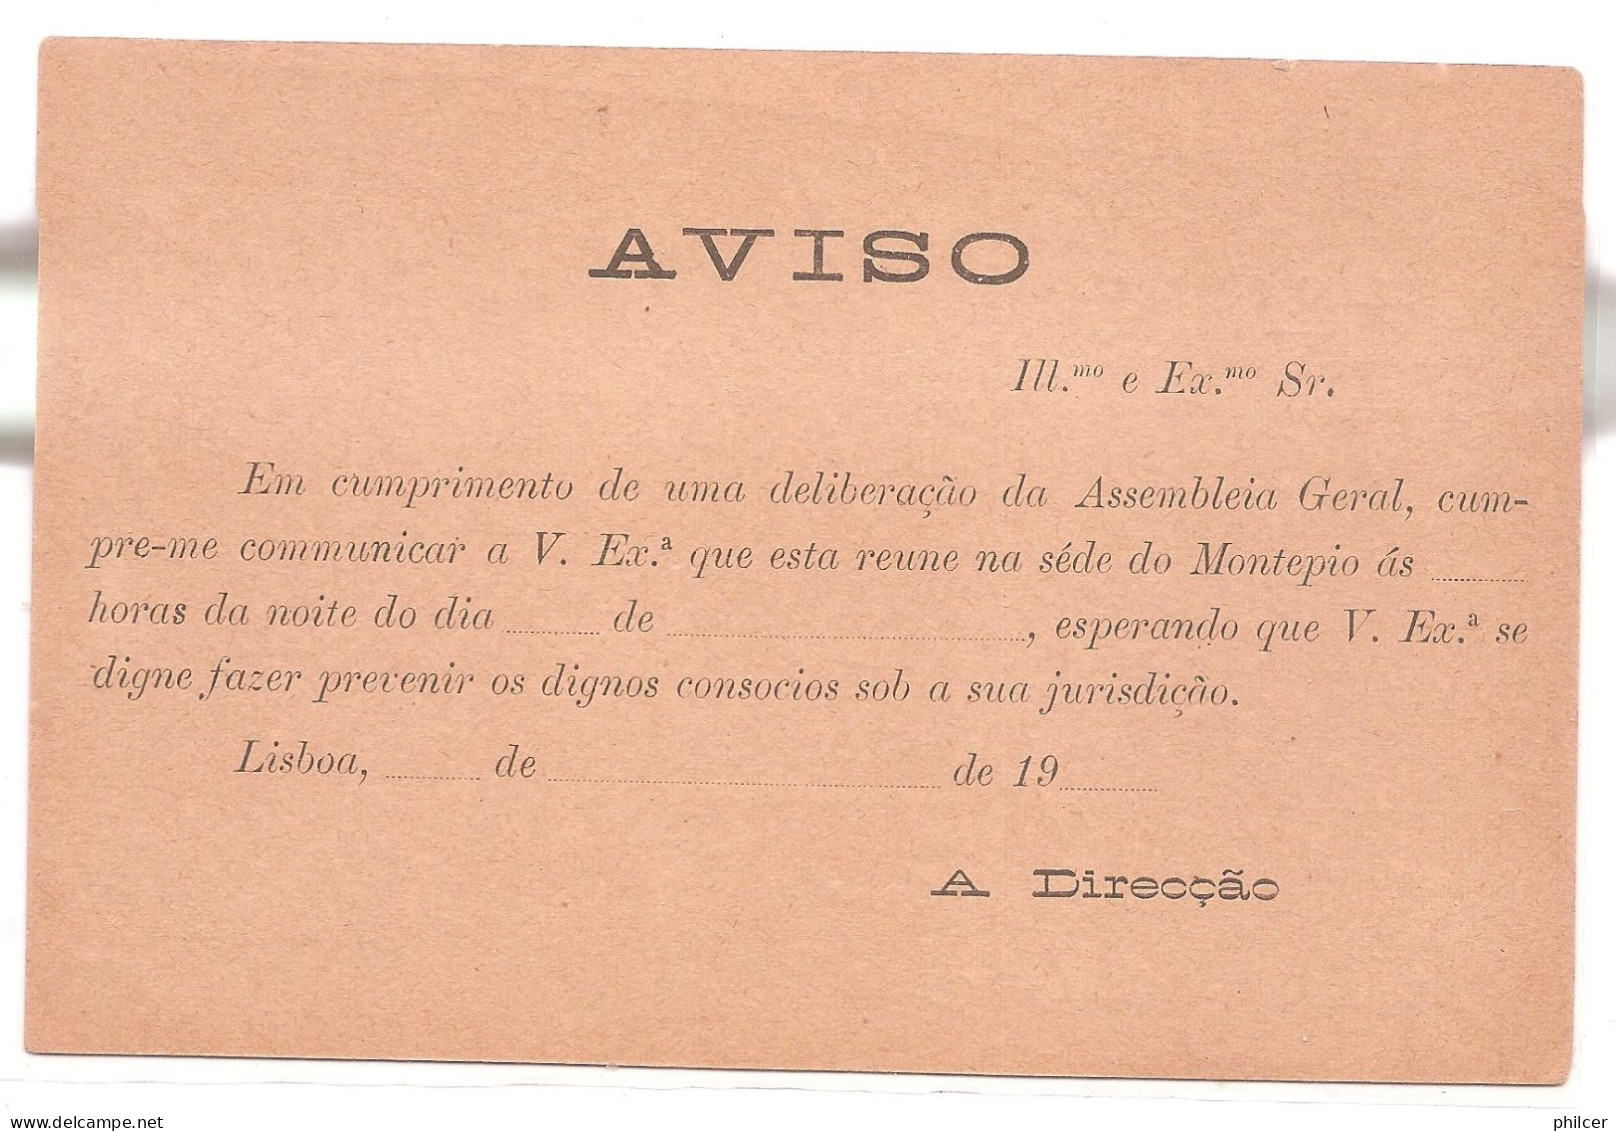 Portugal, 1905, S. N. R. - Lettres & Documents